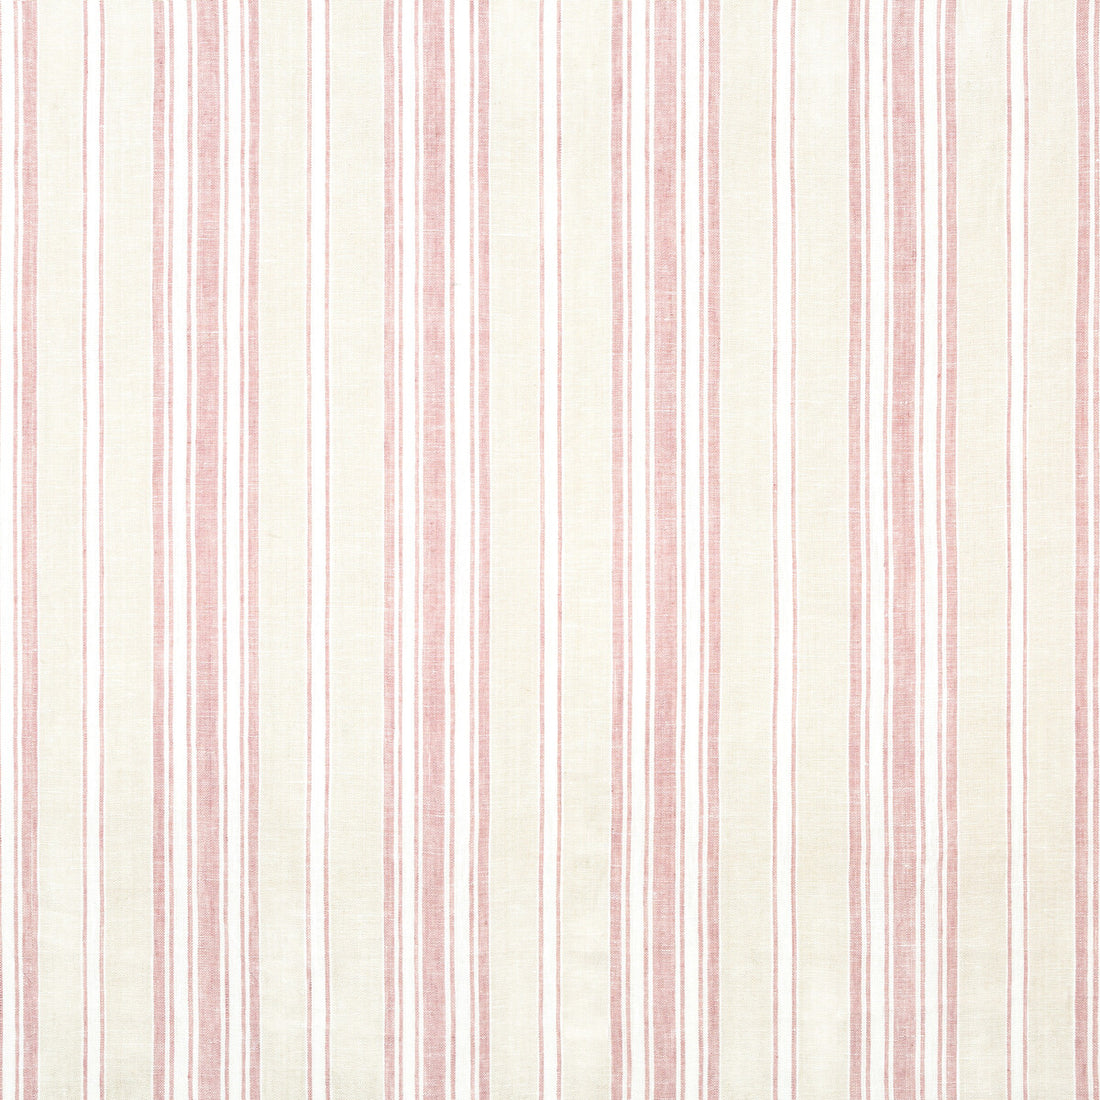 Laurel Stripe fabric in petal color - pattern 2020189.167.0 - by Lee Jofa in the Avondale collection